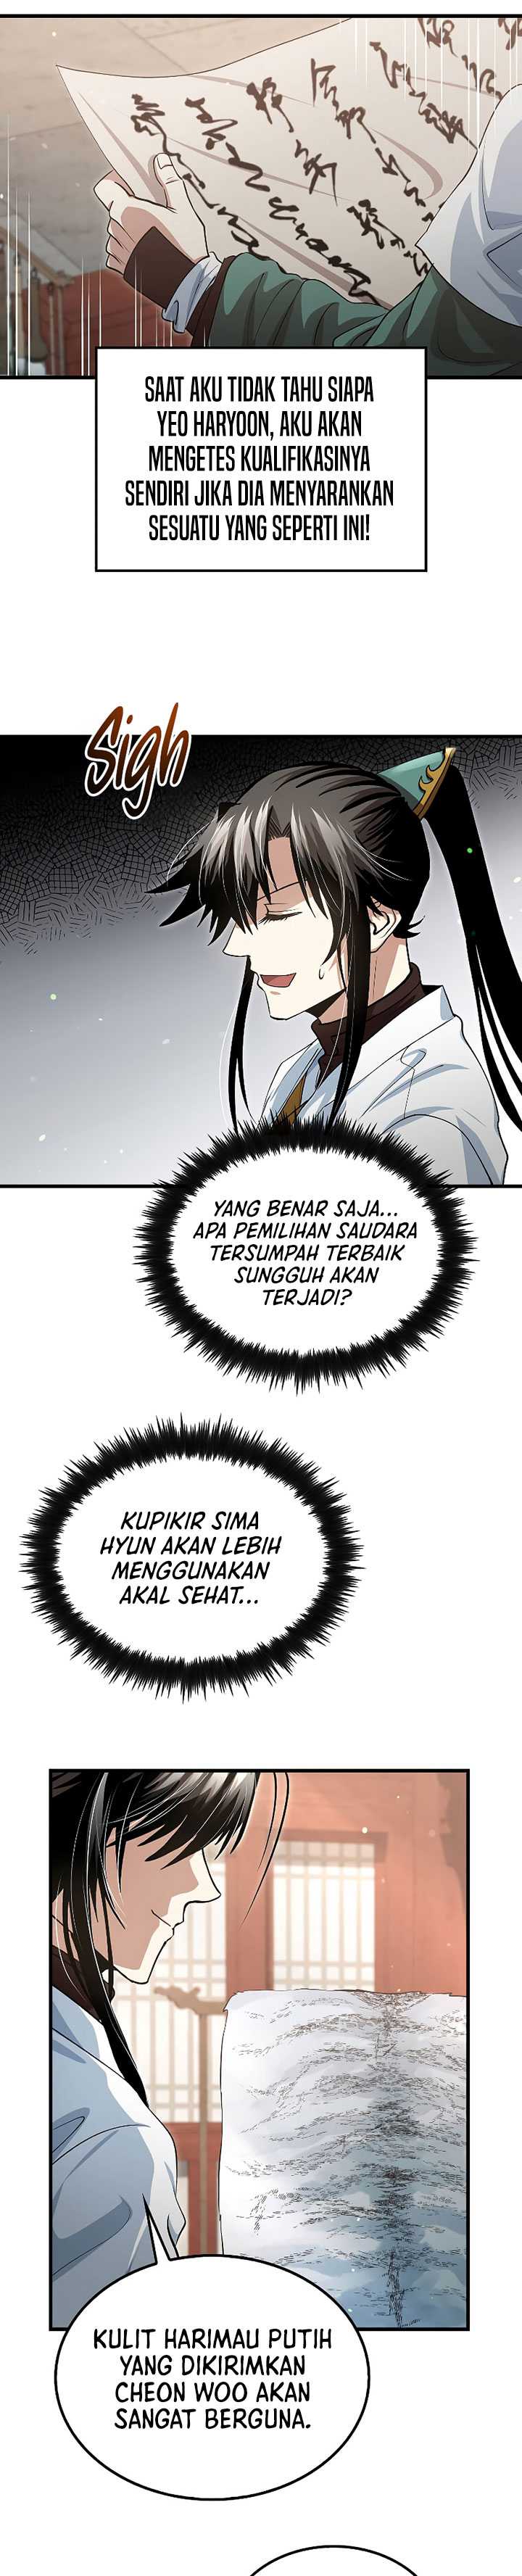 Doctor’s Rebirth Chapter 147